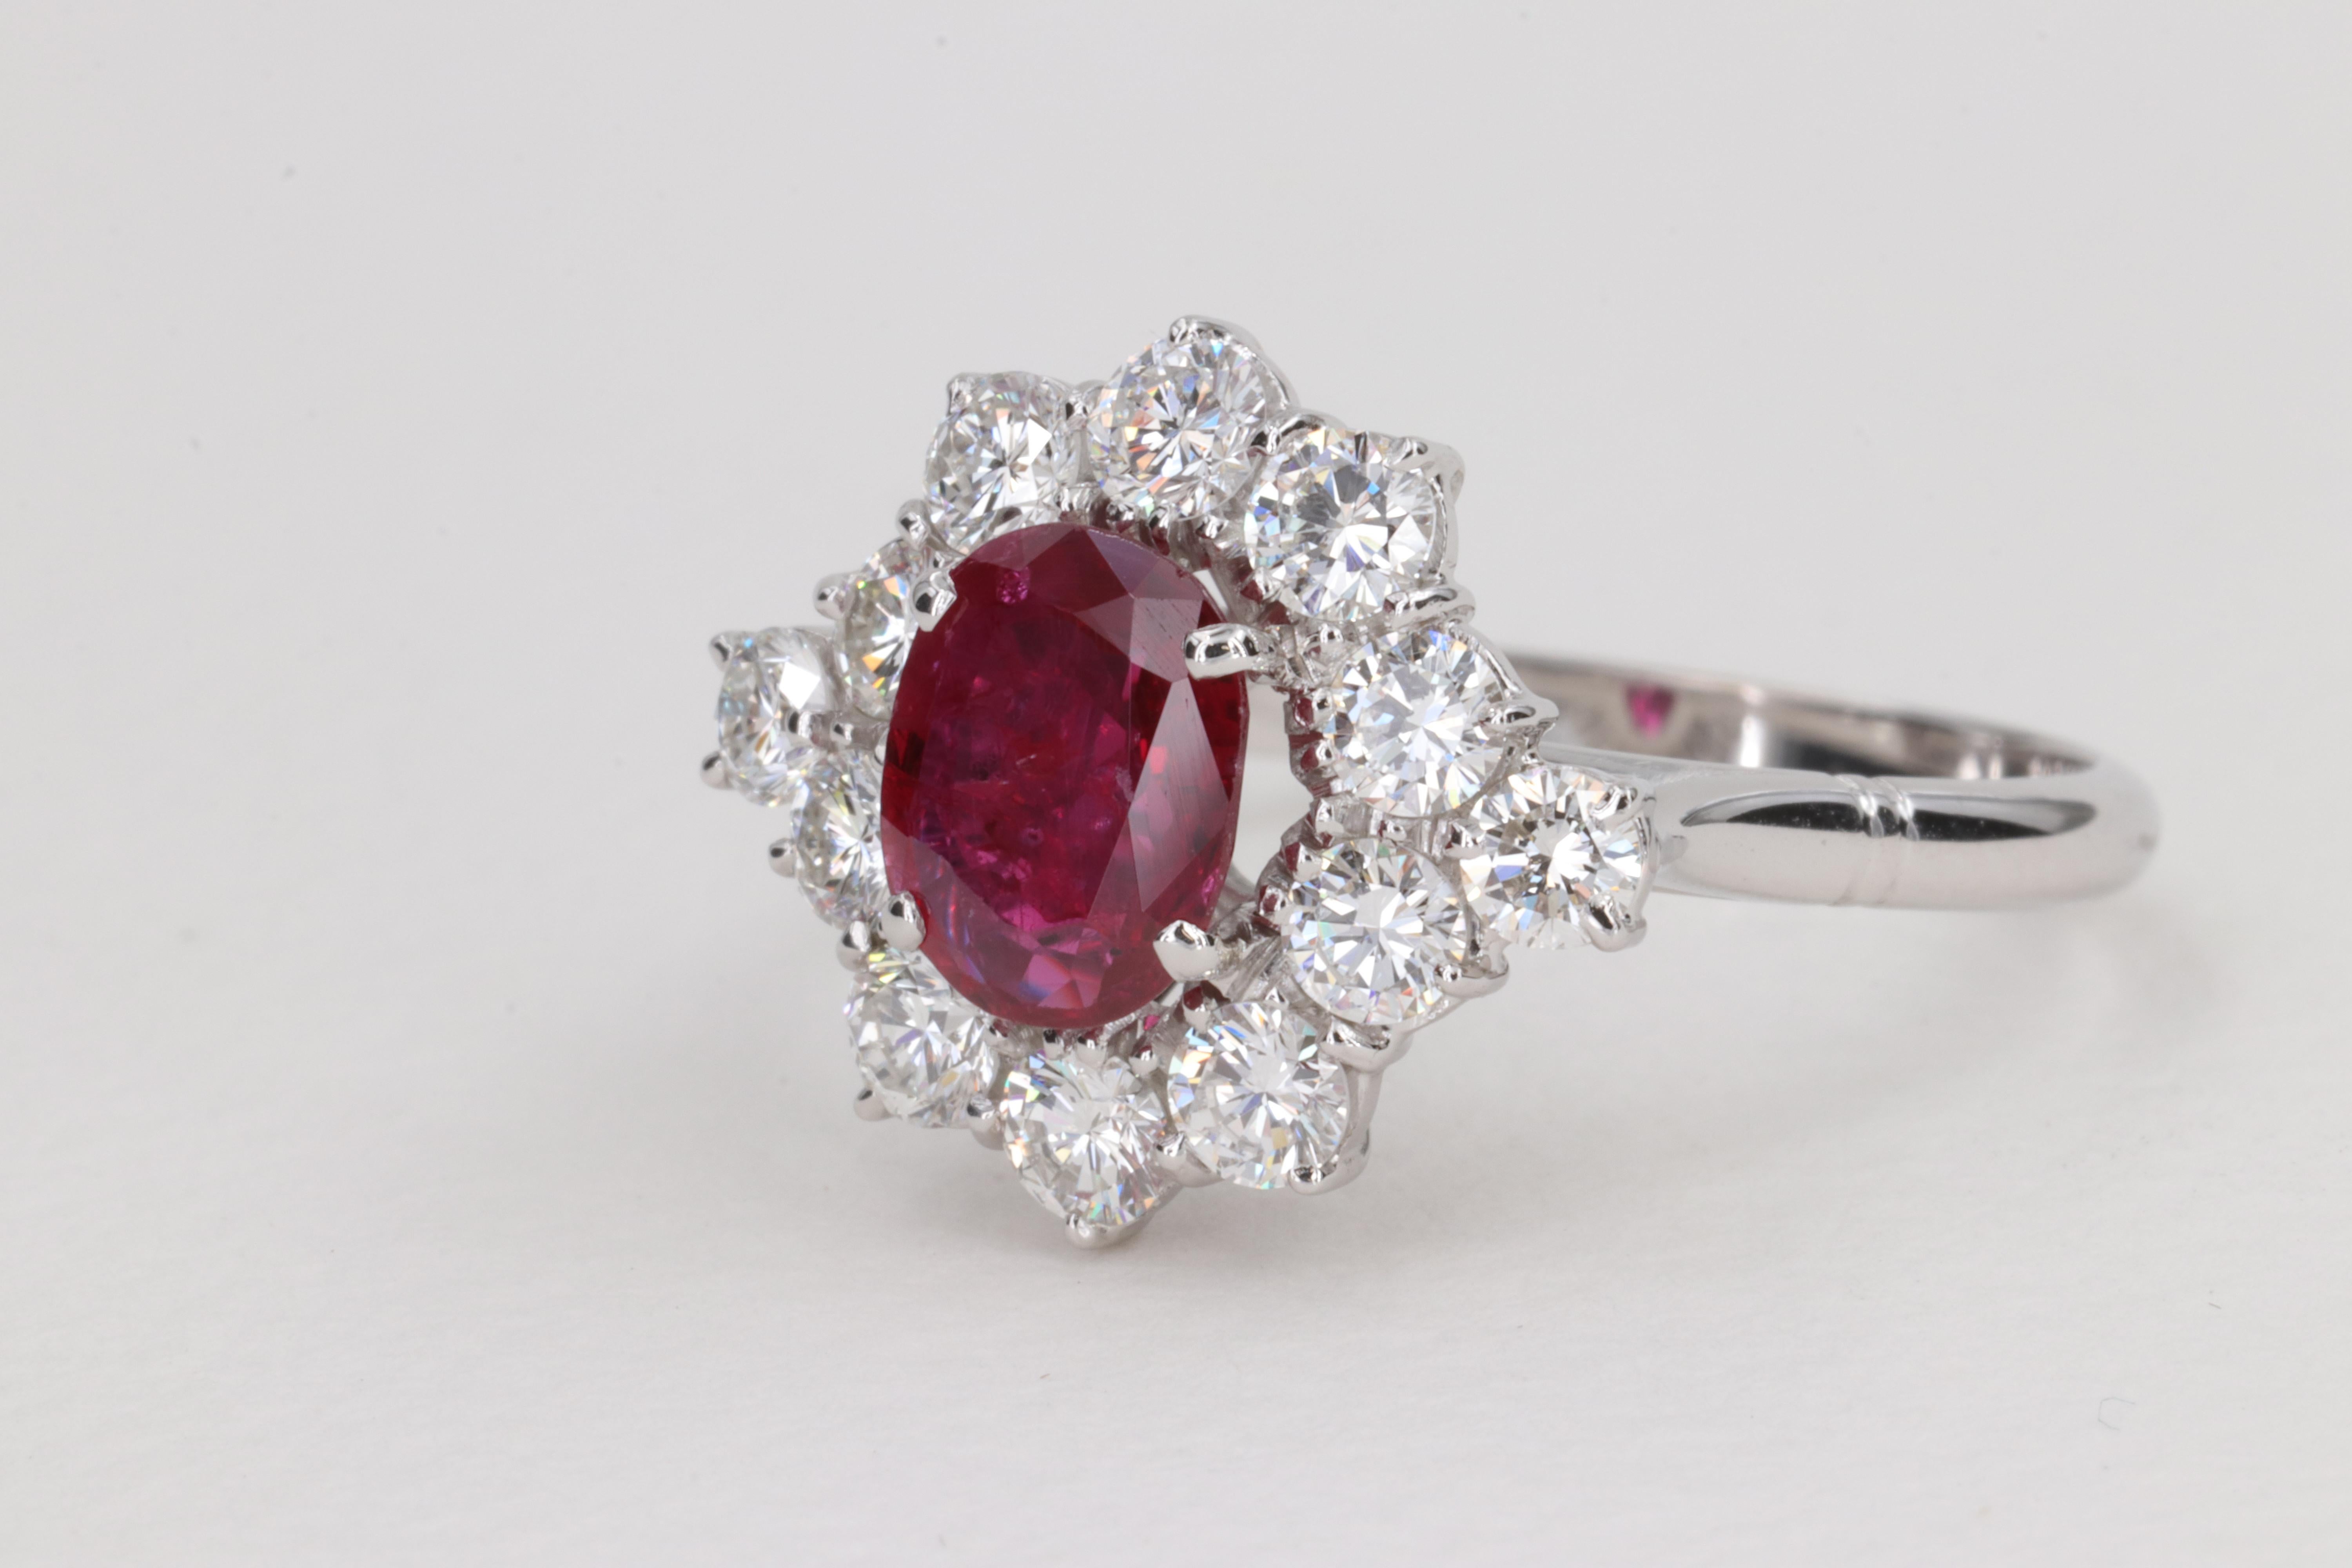 G.I.A. Vivid Red Ruby and Diamond Halo Handmade Ring In Excellent Condition For Sale In Tampa, FL